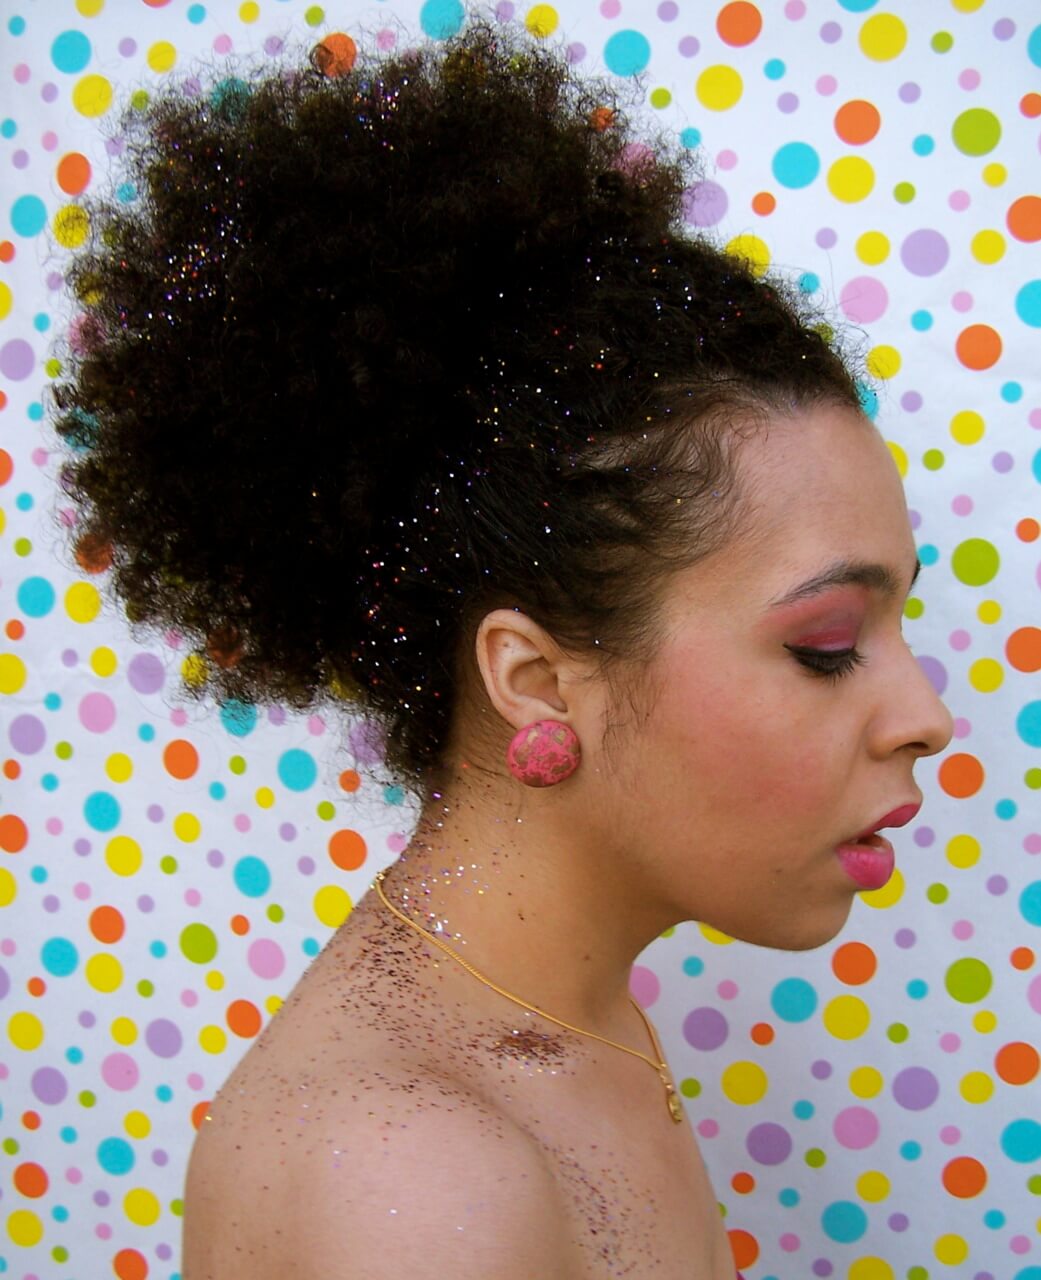 close up shot of woman with glittery afro ponytail, wearing round earrings and pink makeup